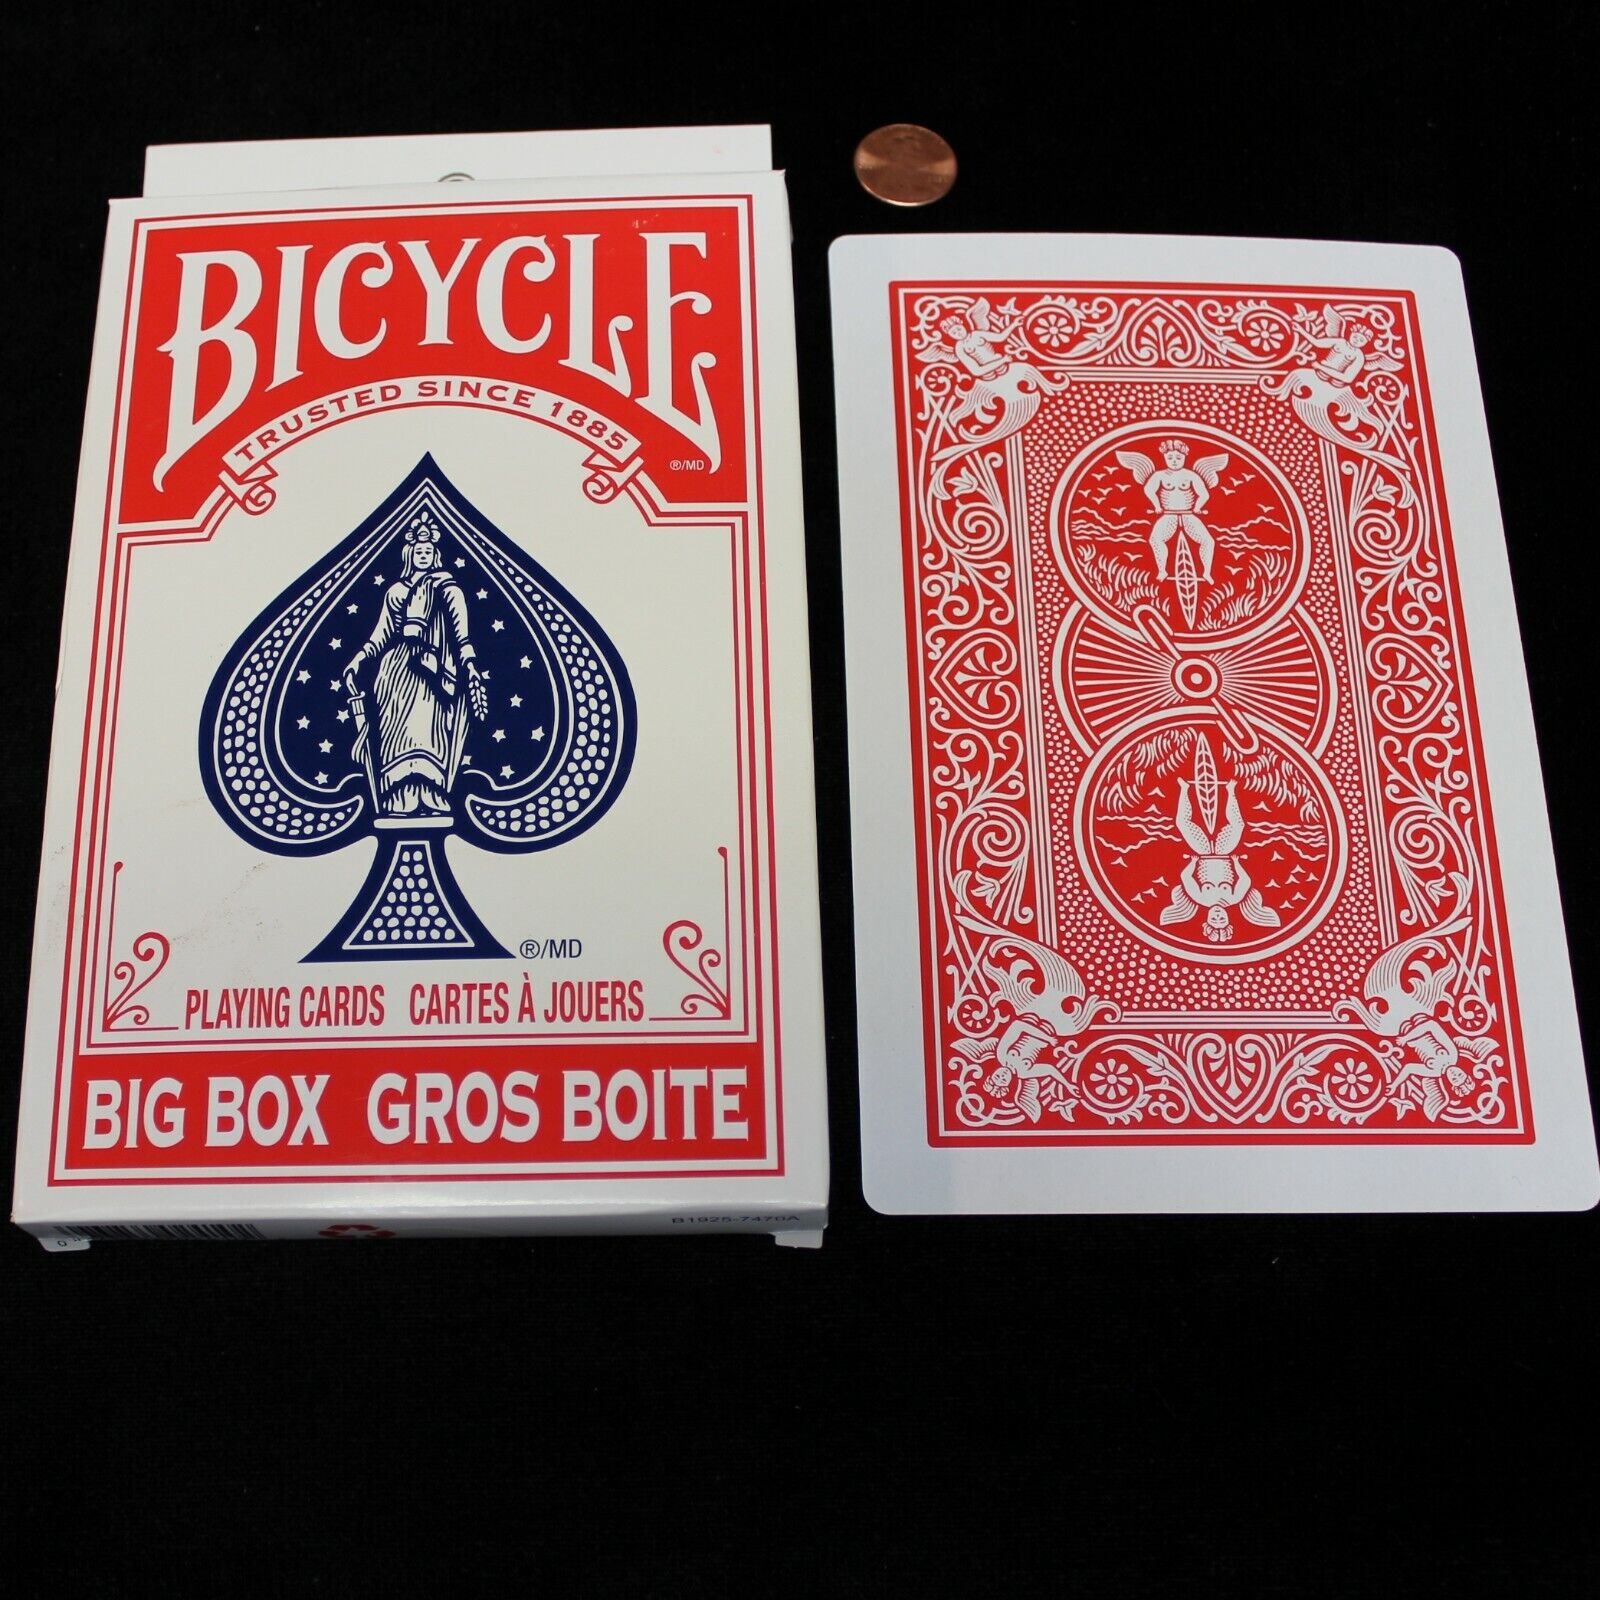 Jumbo 1-Way Forcing Card Deck, Magic Trick - Bicycle Big Box Gros Boite, One Red